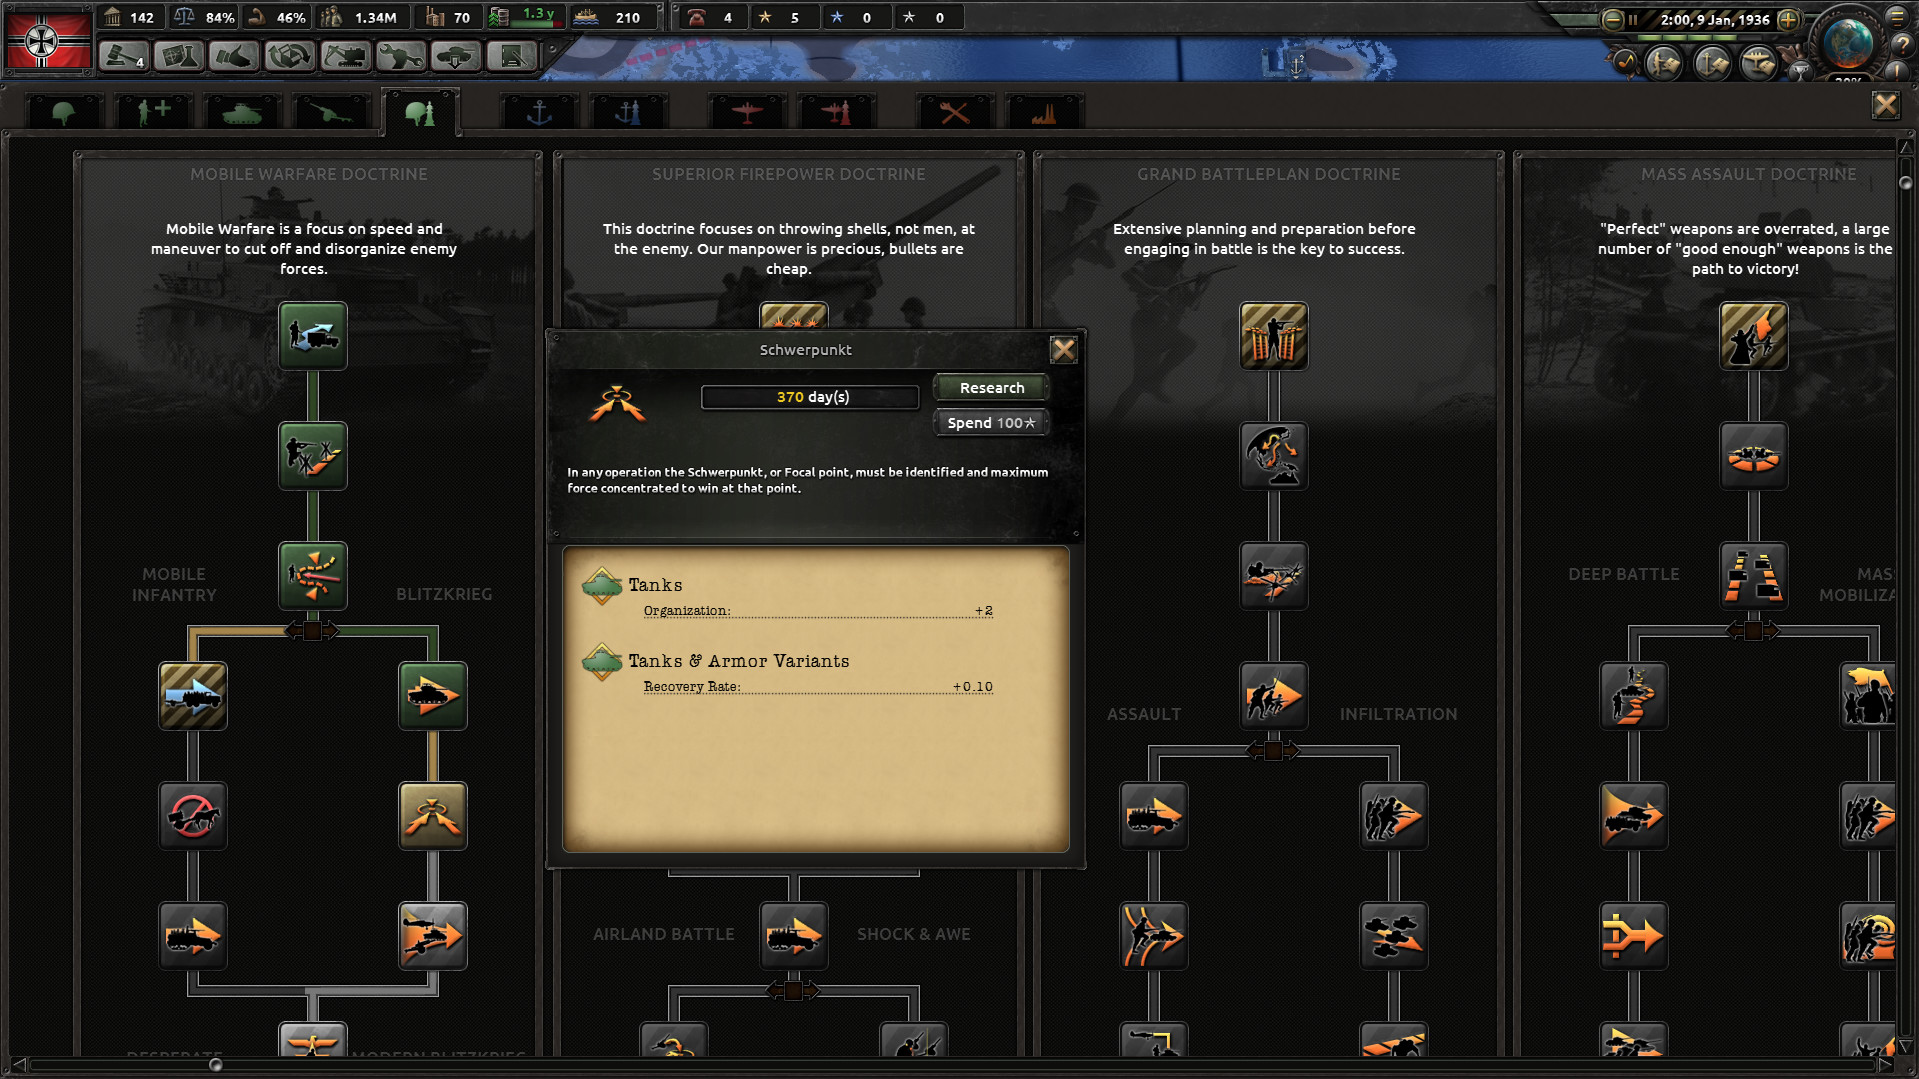 Hearts of Iron IV - Starter Edition